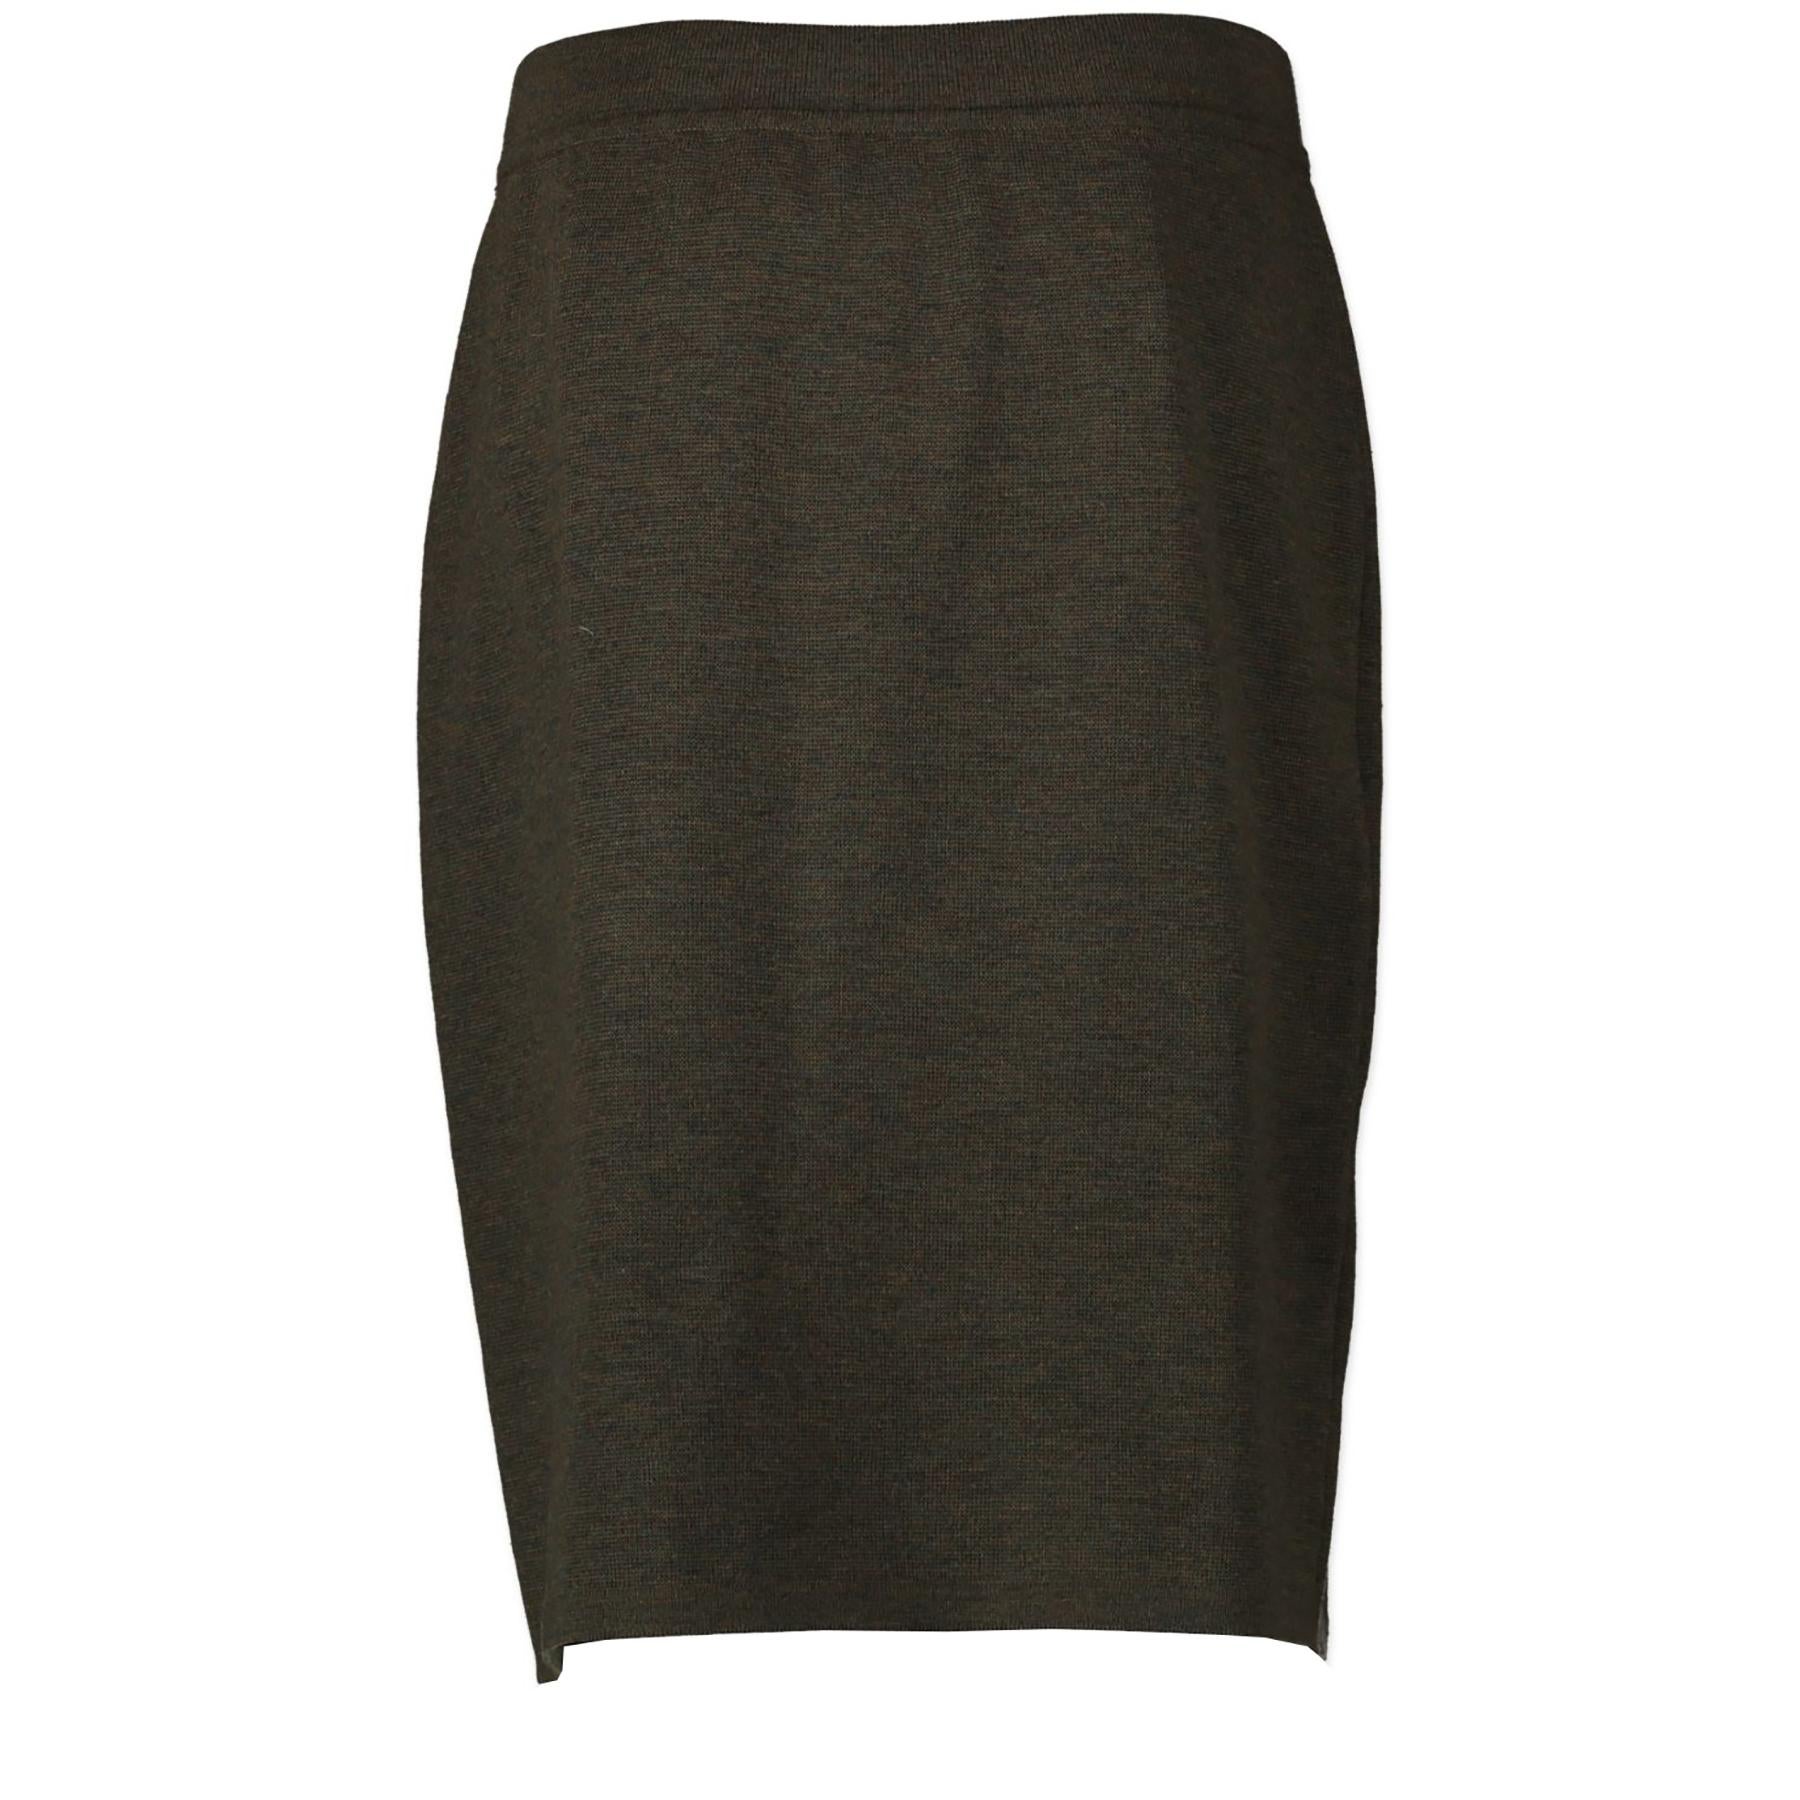 Very good preloved condition

Chanel Khaki Green Skirt

When we think of Chanel, we think of timeless and elegant designs and this skirt surely is no exception. This sophisticated skirt comes in a gorgeous khaki green colour and has a slim fit.